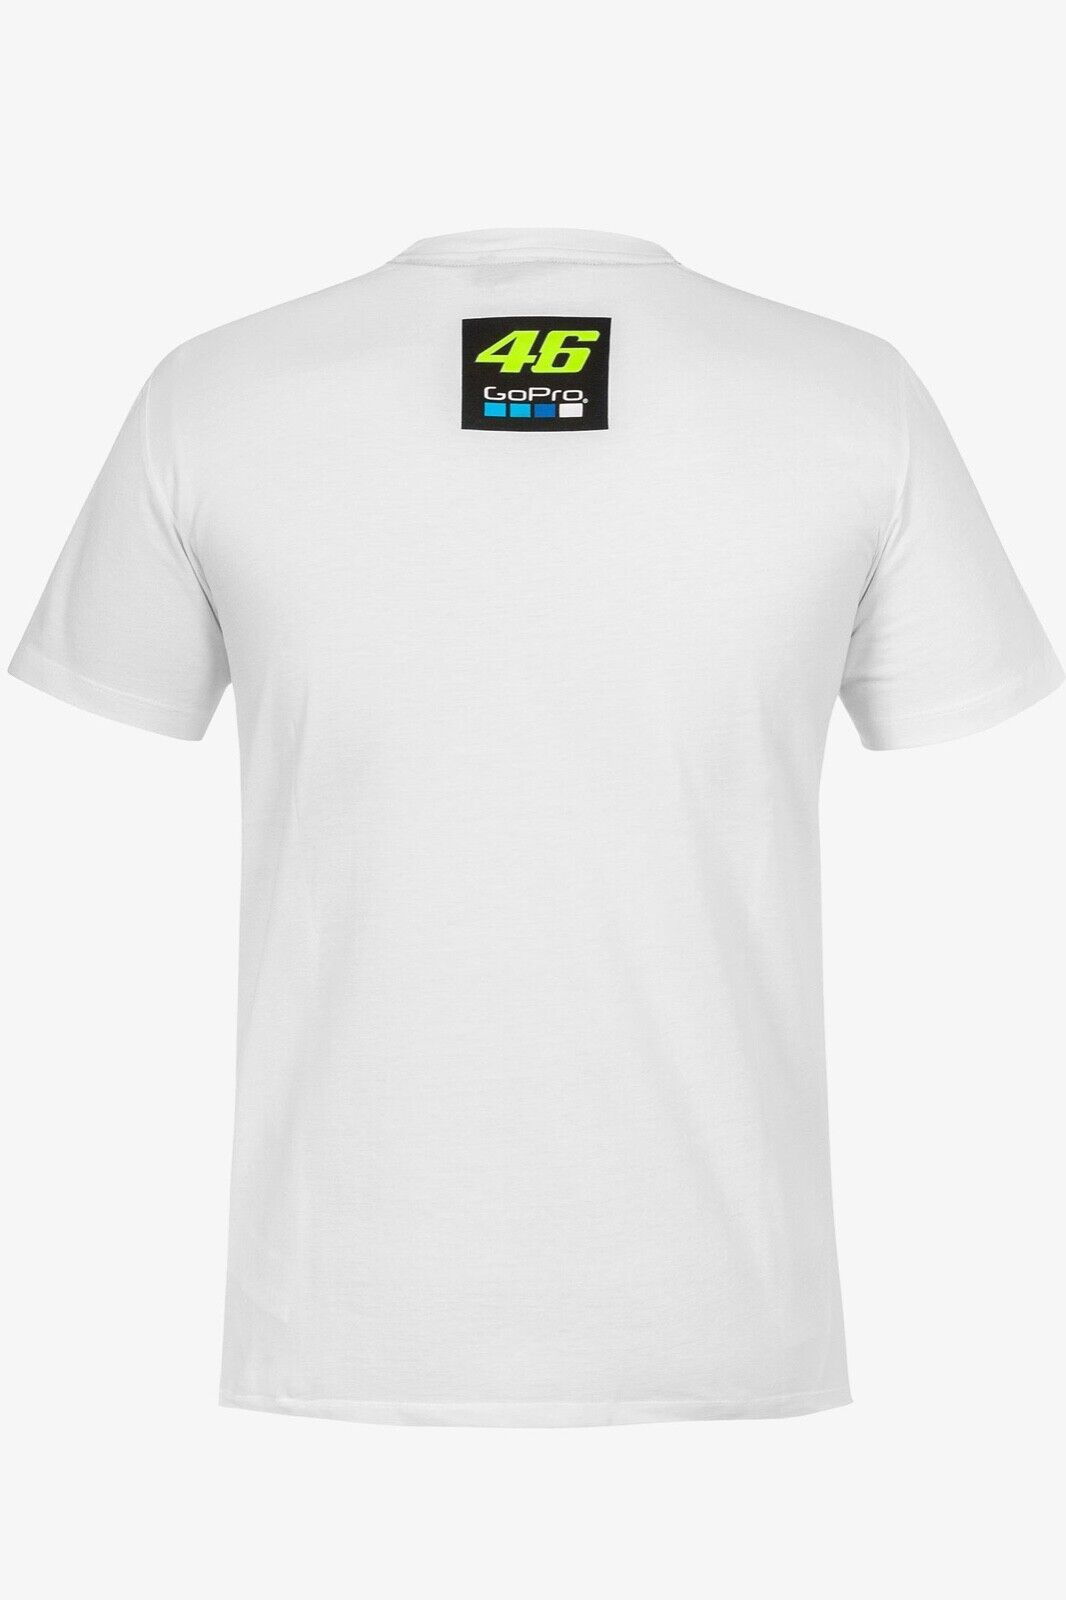 VR46 Official Valentino Rossi Moto Ranch Gopro T'Shirt - Gomts 291106